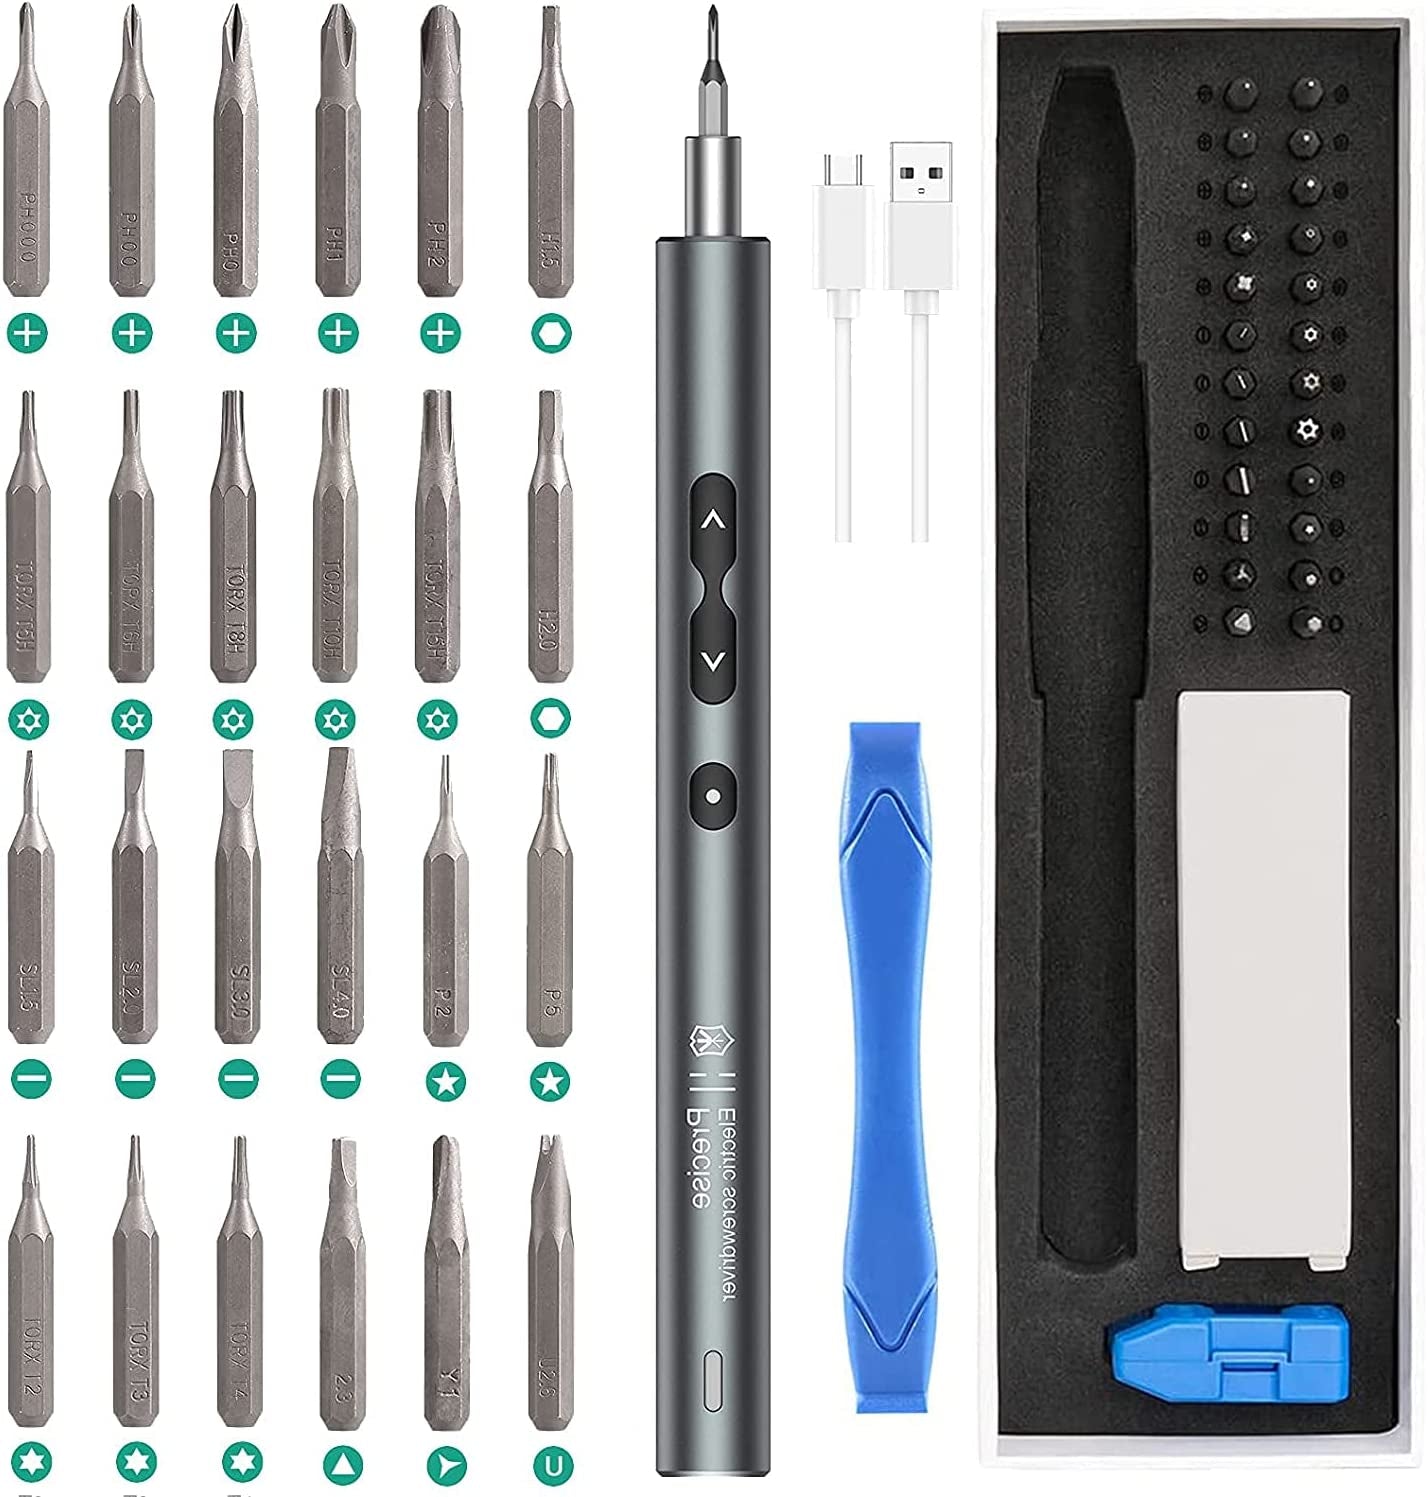 AMIR, Electric Screwdriver, 28 in 1 Precision Screwdriver Set with 24 Bits and USB Cable, Portable Magnetic Repair Tool Kit with LED Lights for Phones Watch Jewelers Computers